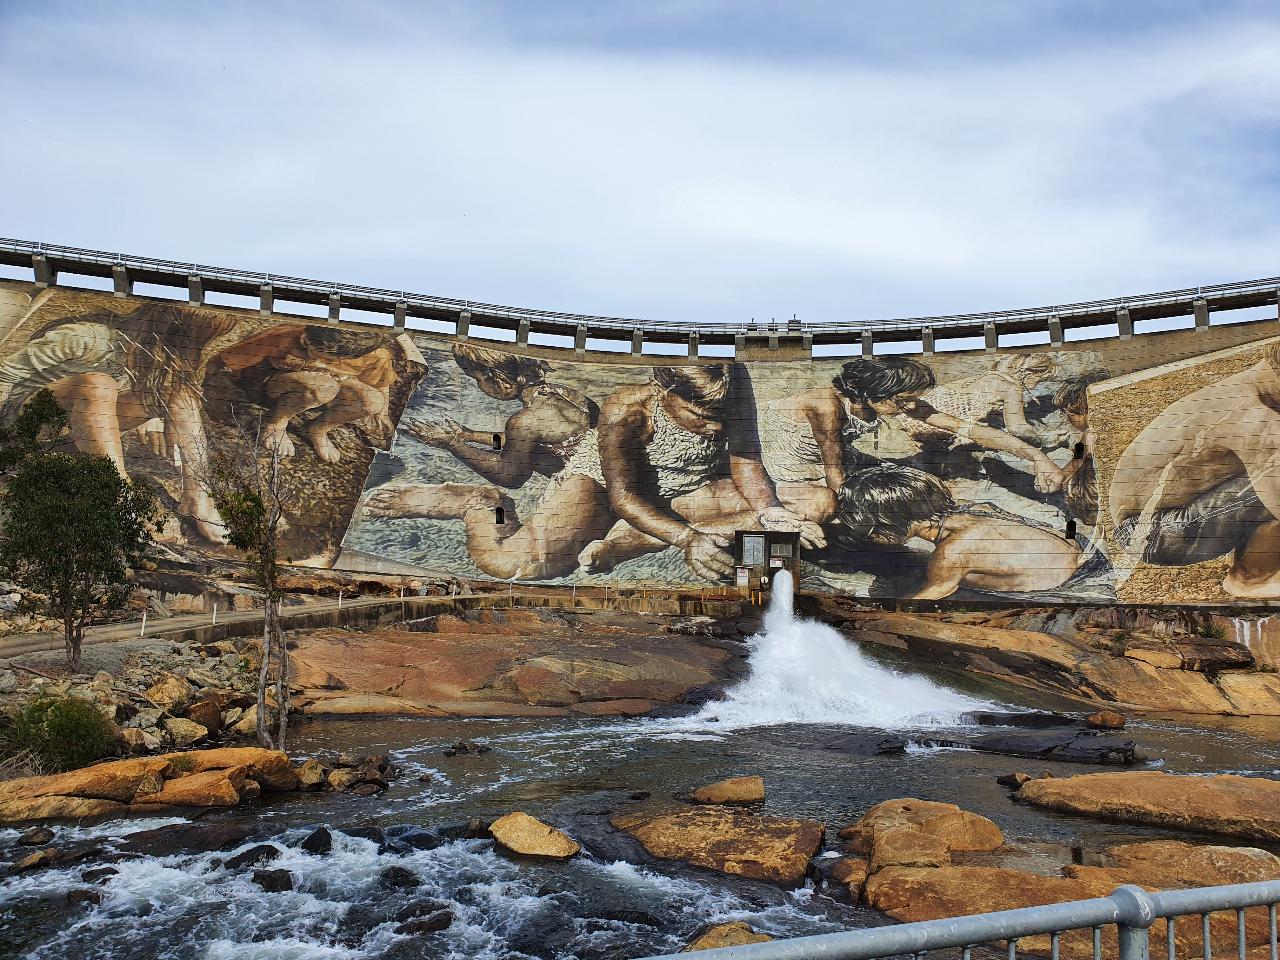 The Amazing Wellington Dam Murals and Region Day Photographic Tour